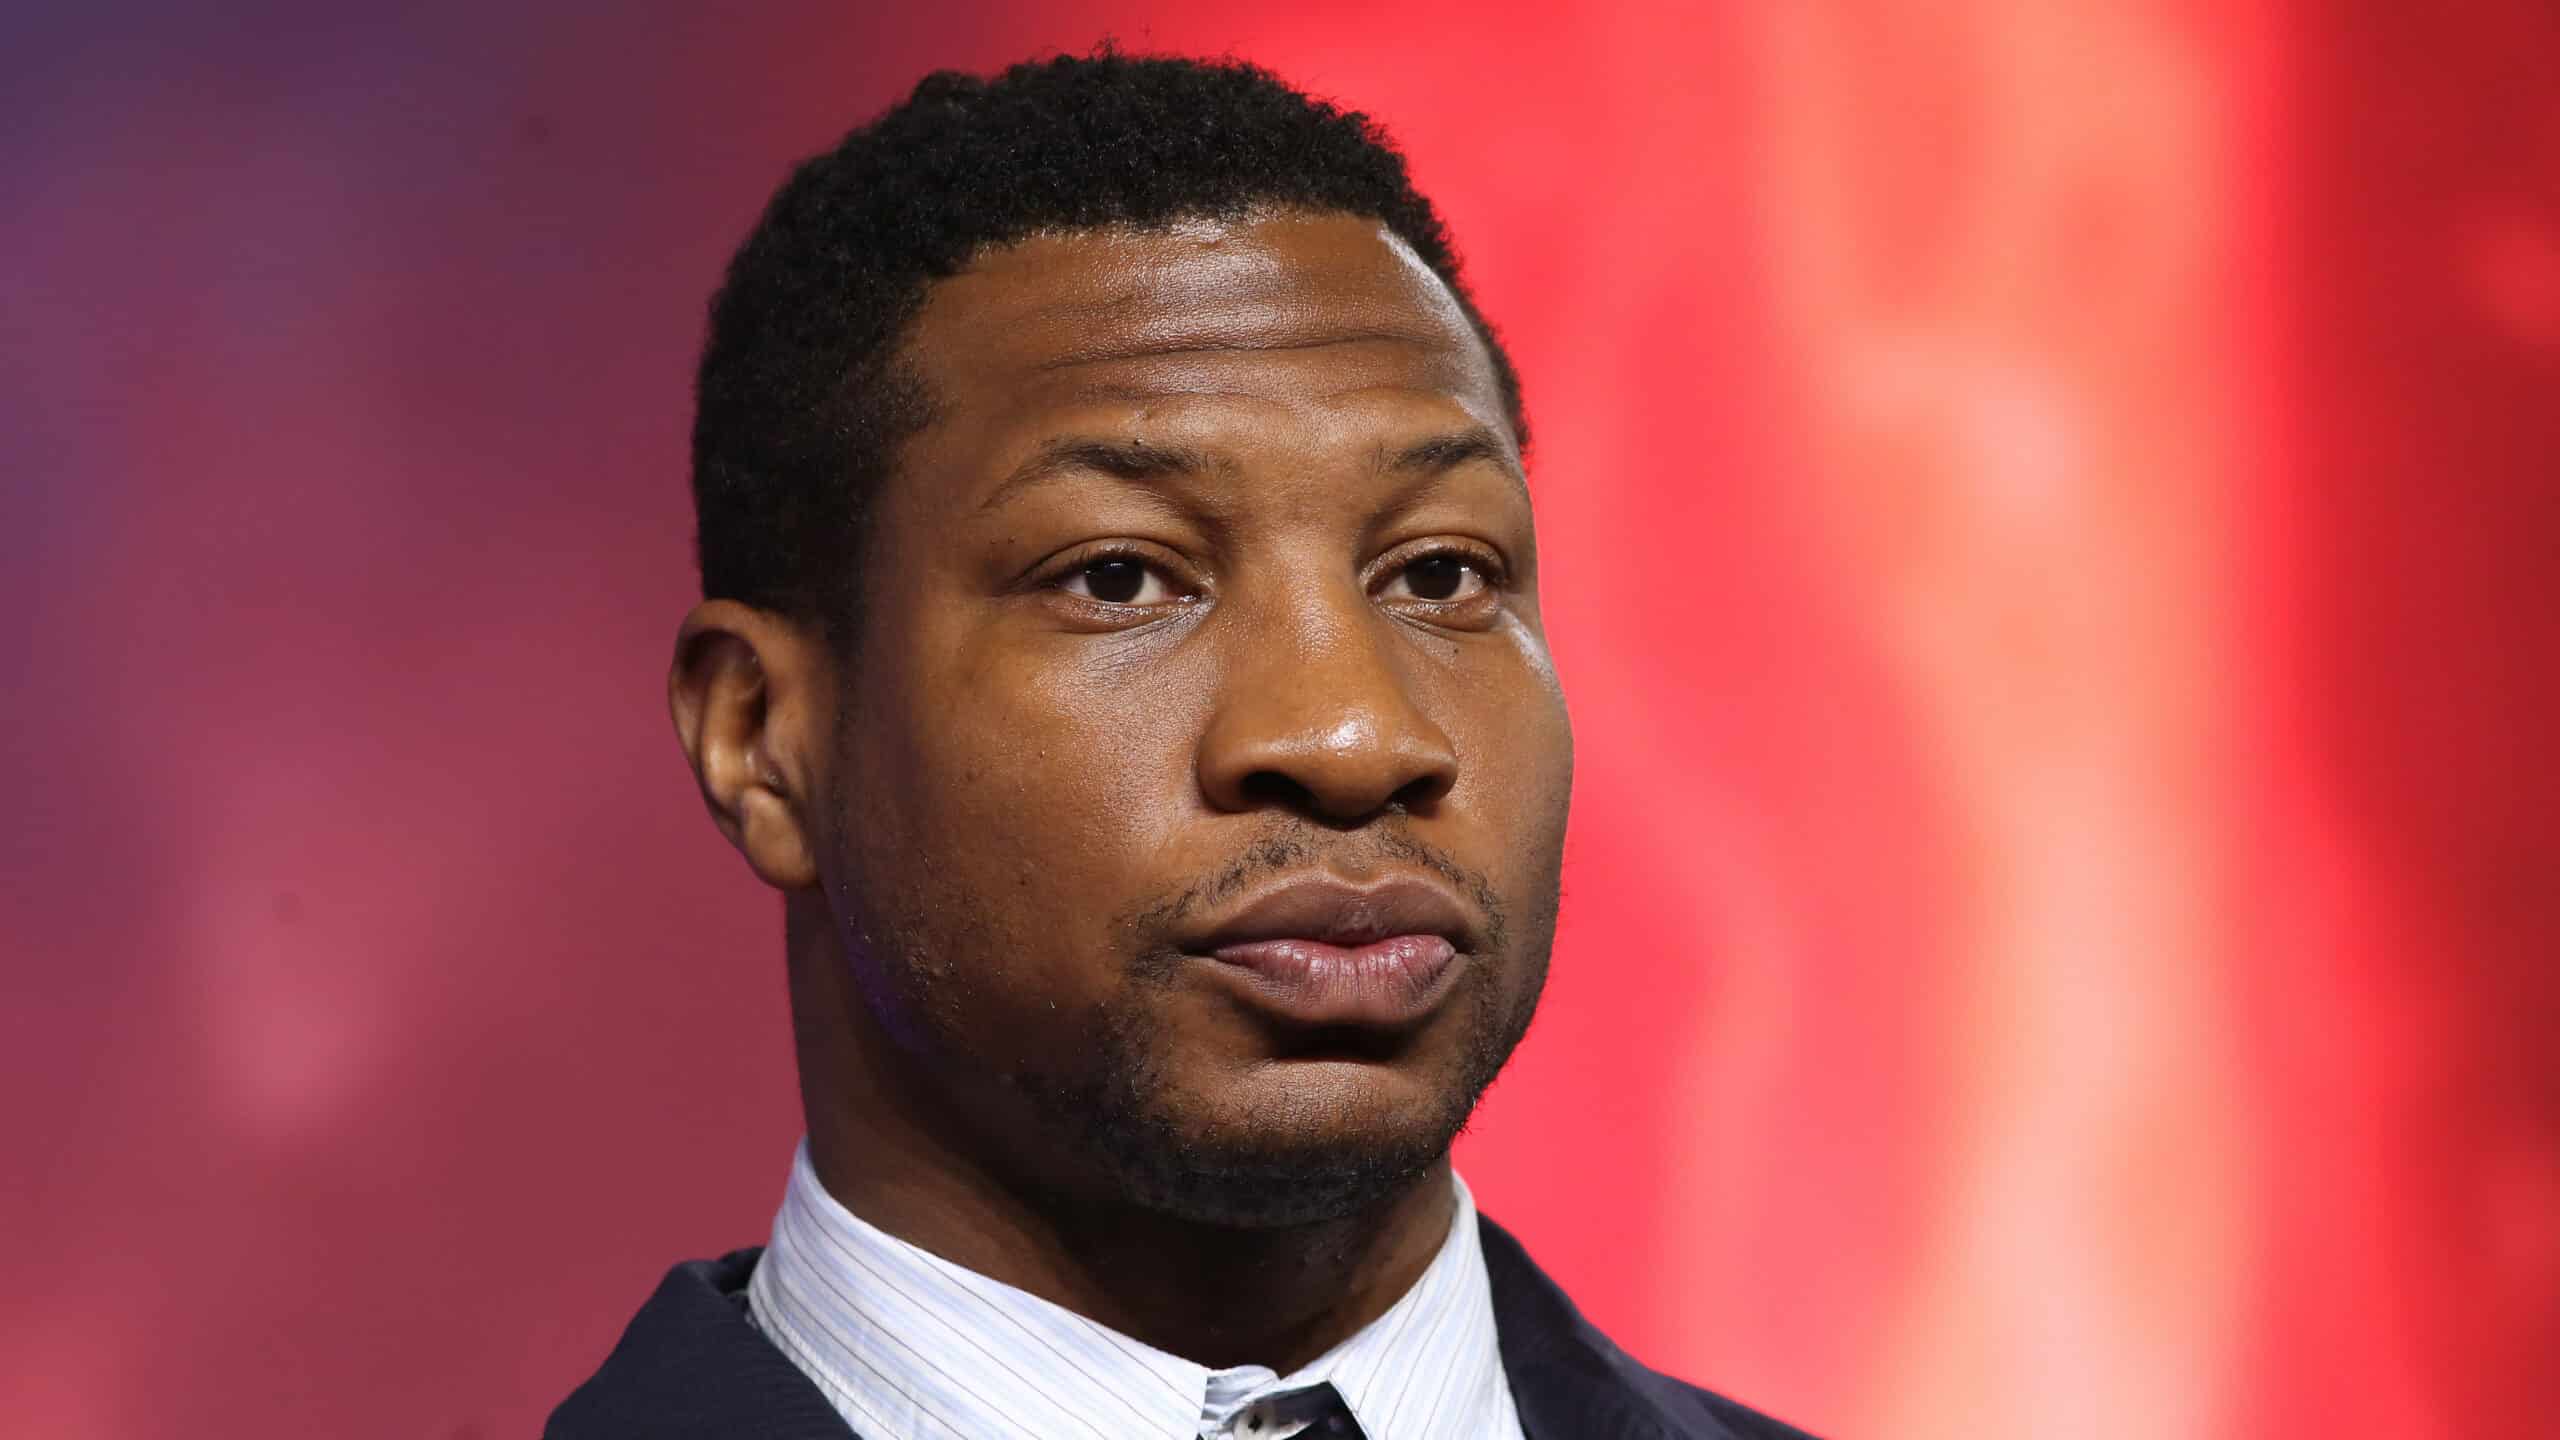 Jonathan Majors, actor, charges